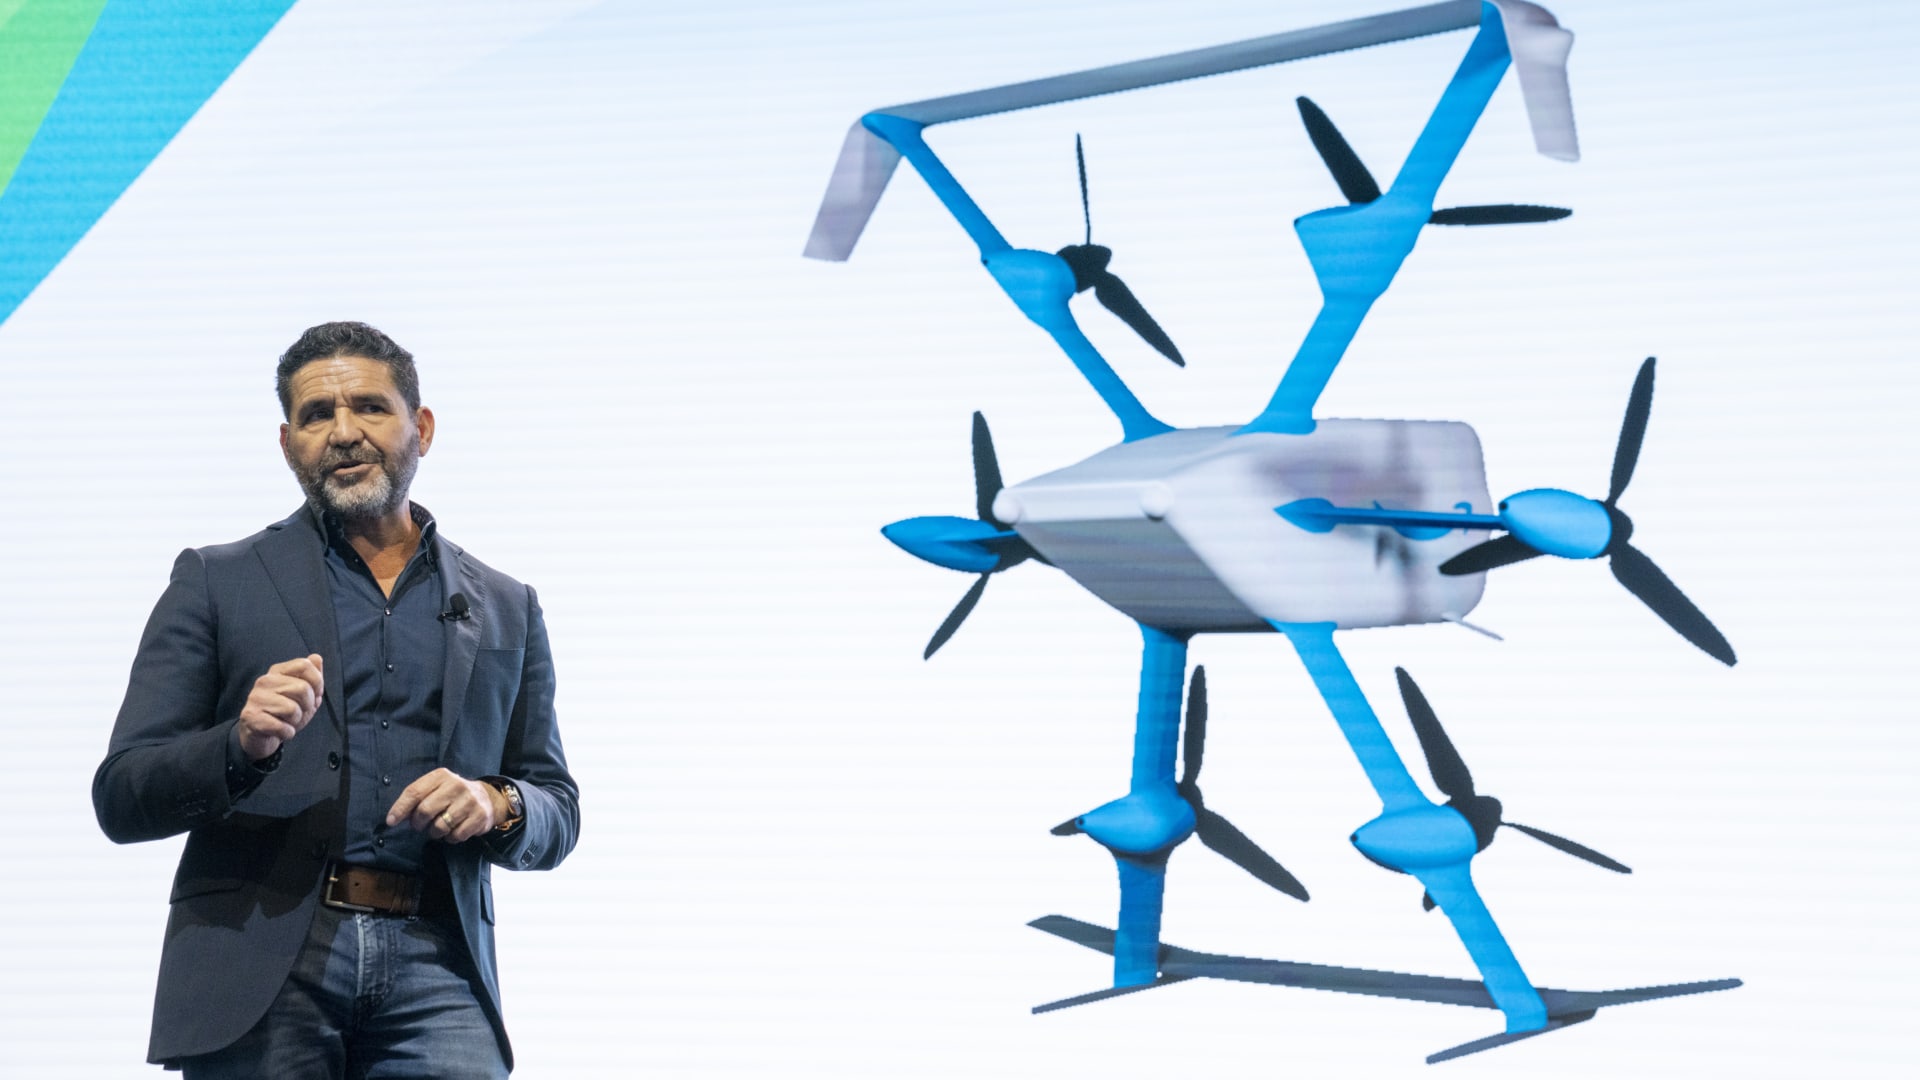 Amazon's drone business can't get off the ground as regulations, weak demand stymie progress